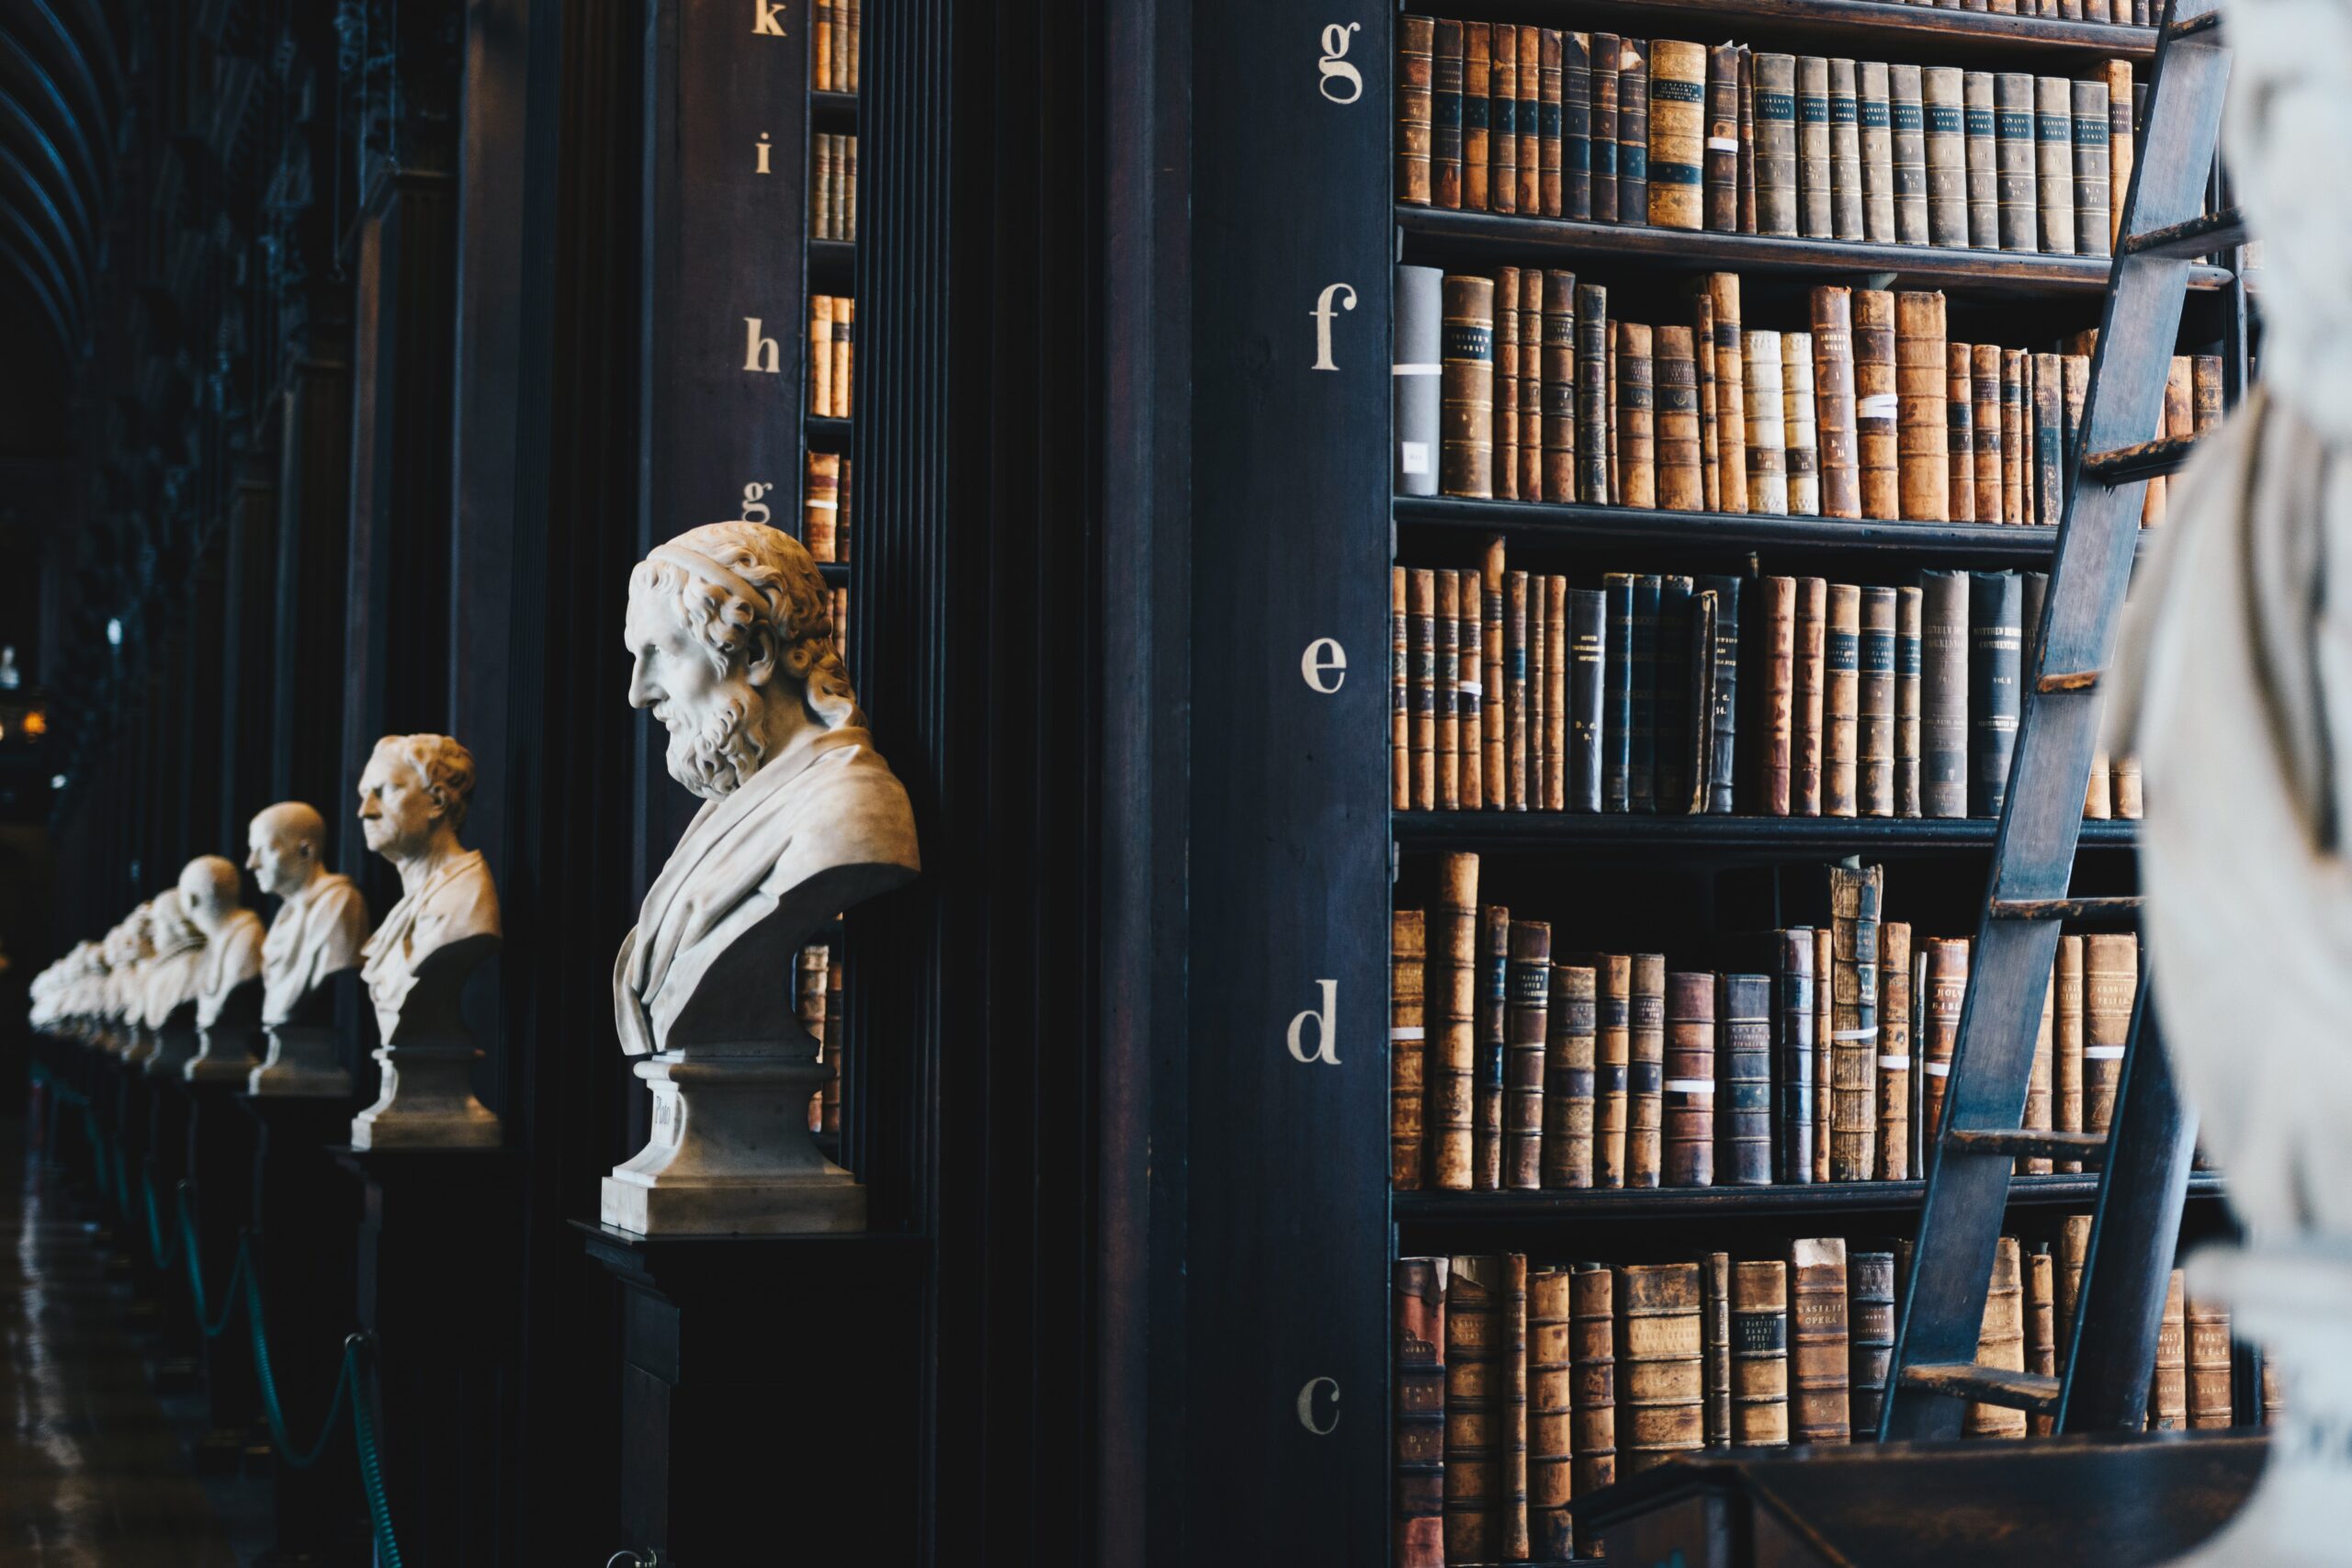 busts of the world's great philosophers in a library